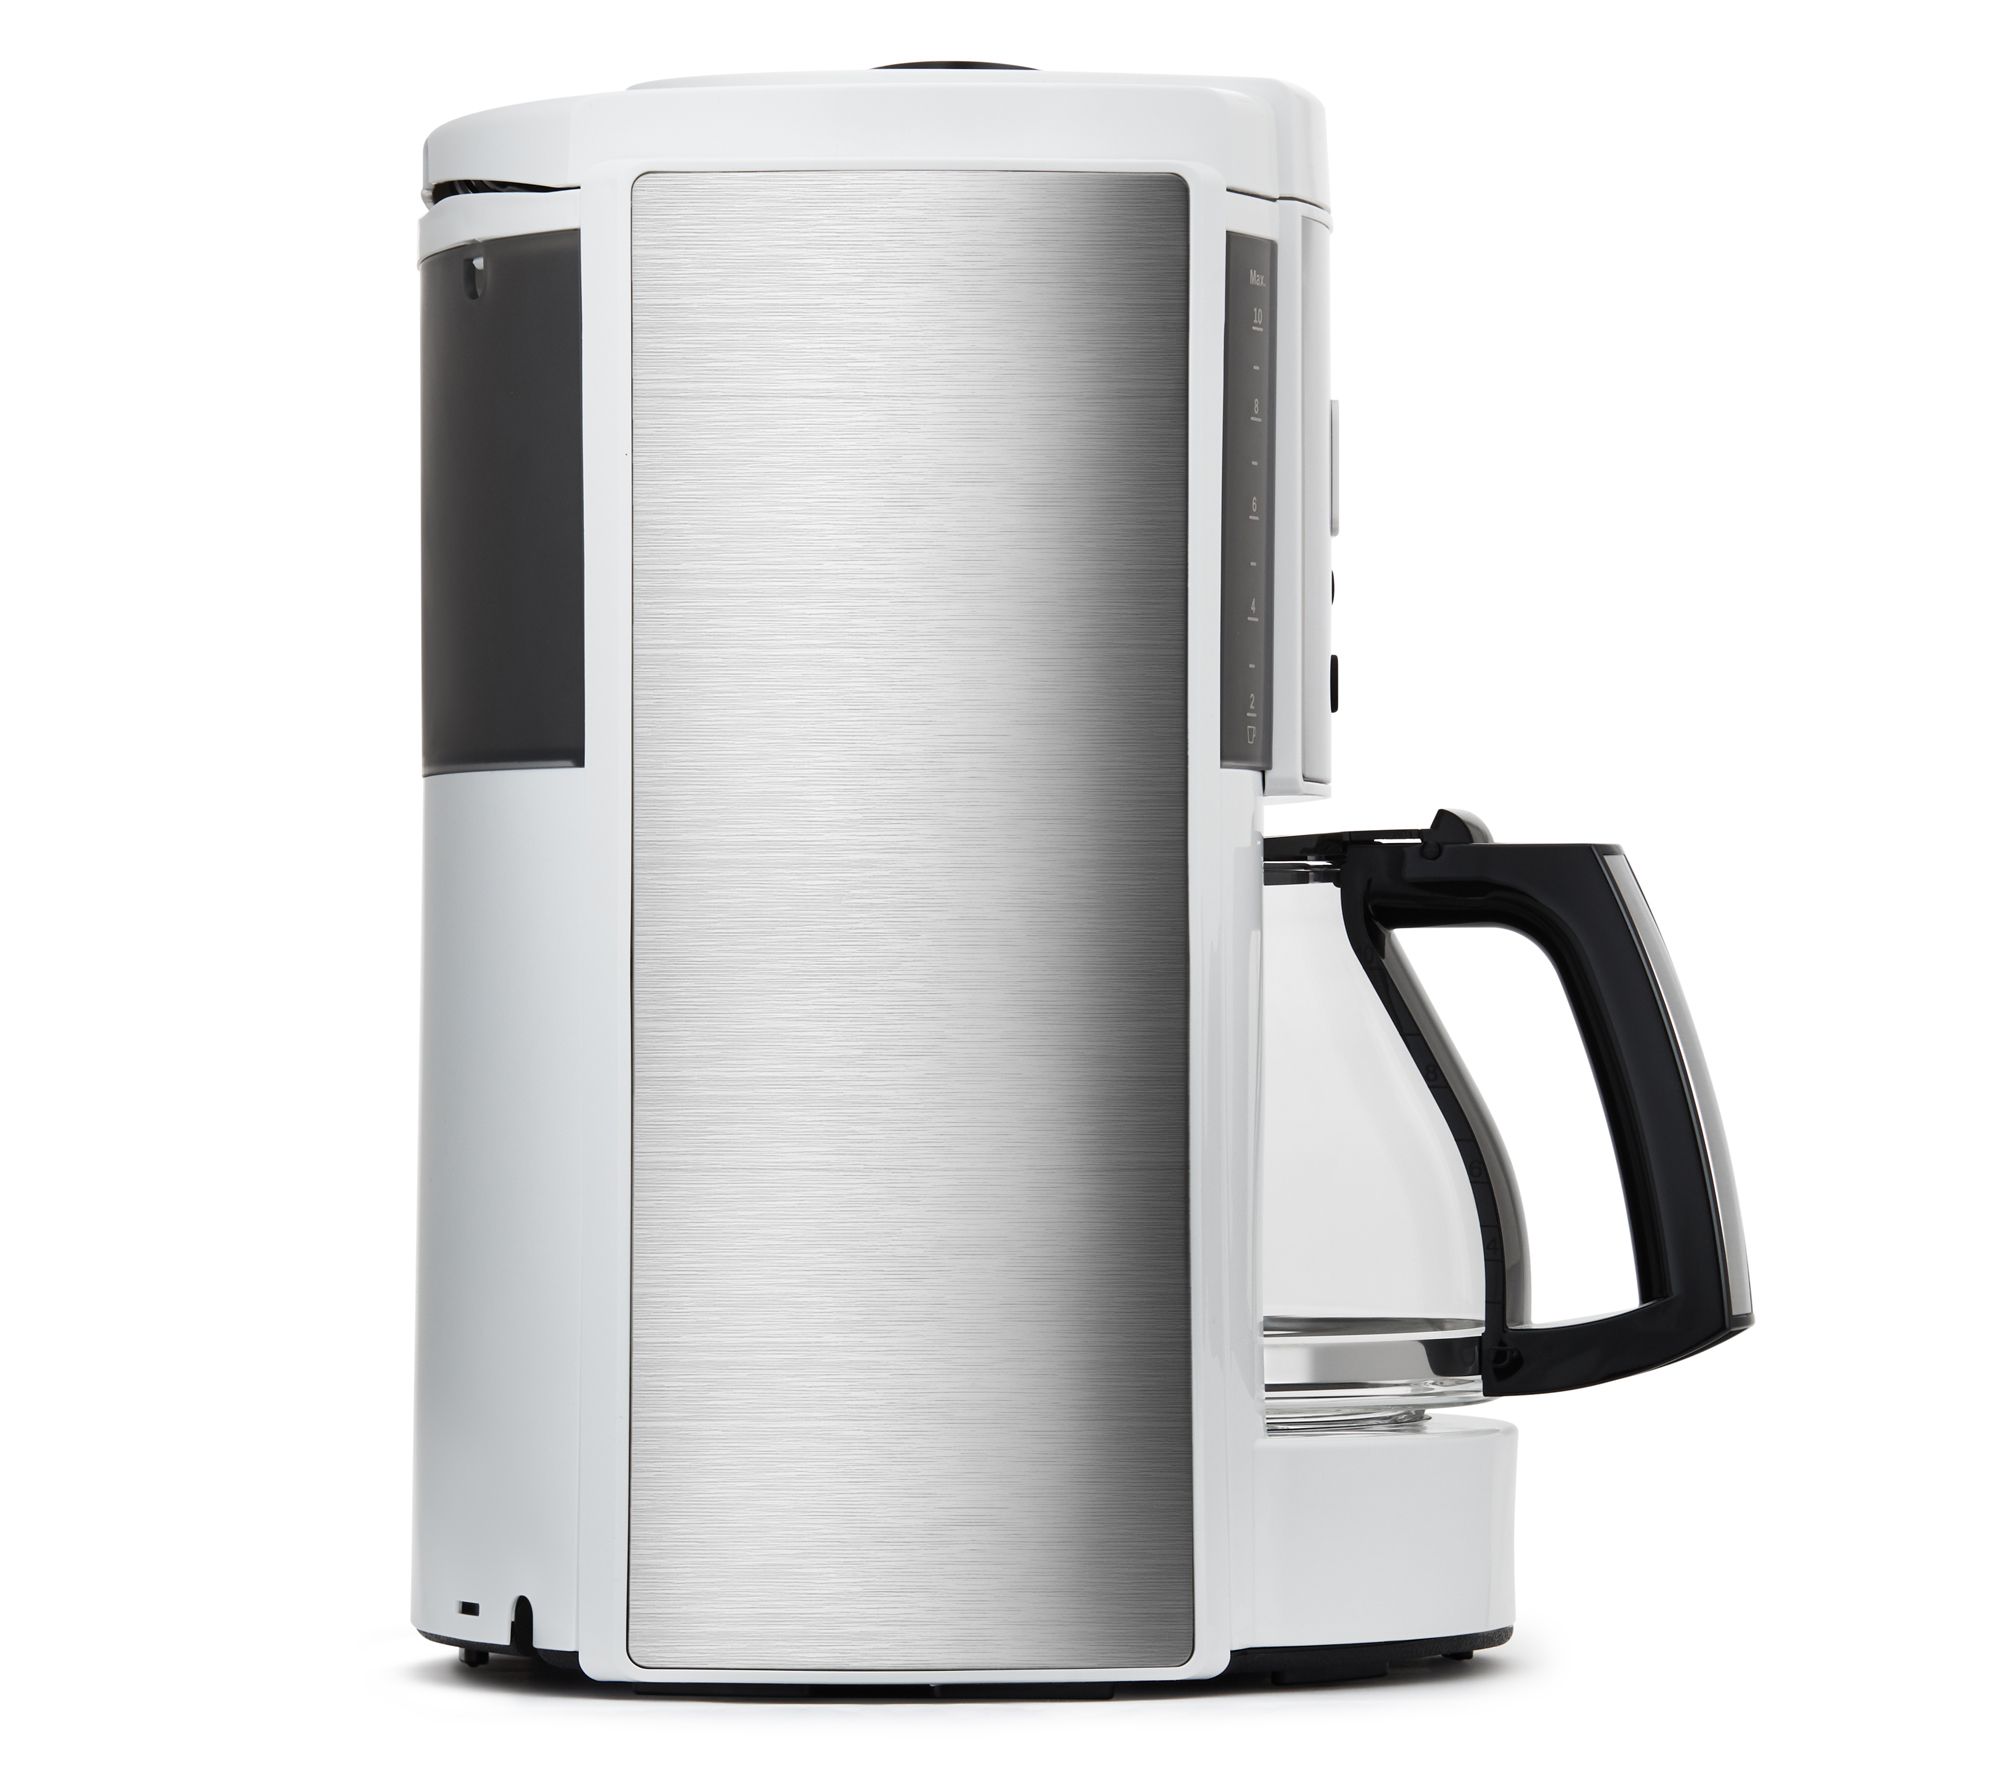 PowerXL Smart Brew, 10-Cup Drip Coffee Maker with Strength & Flavor Control